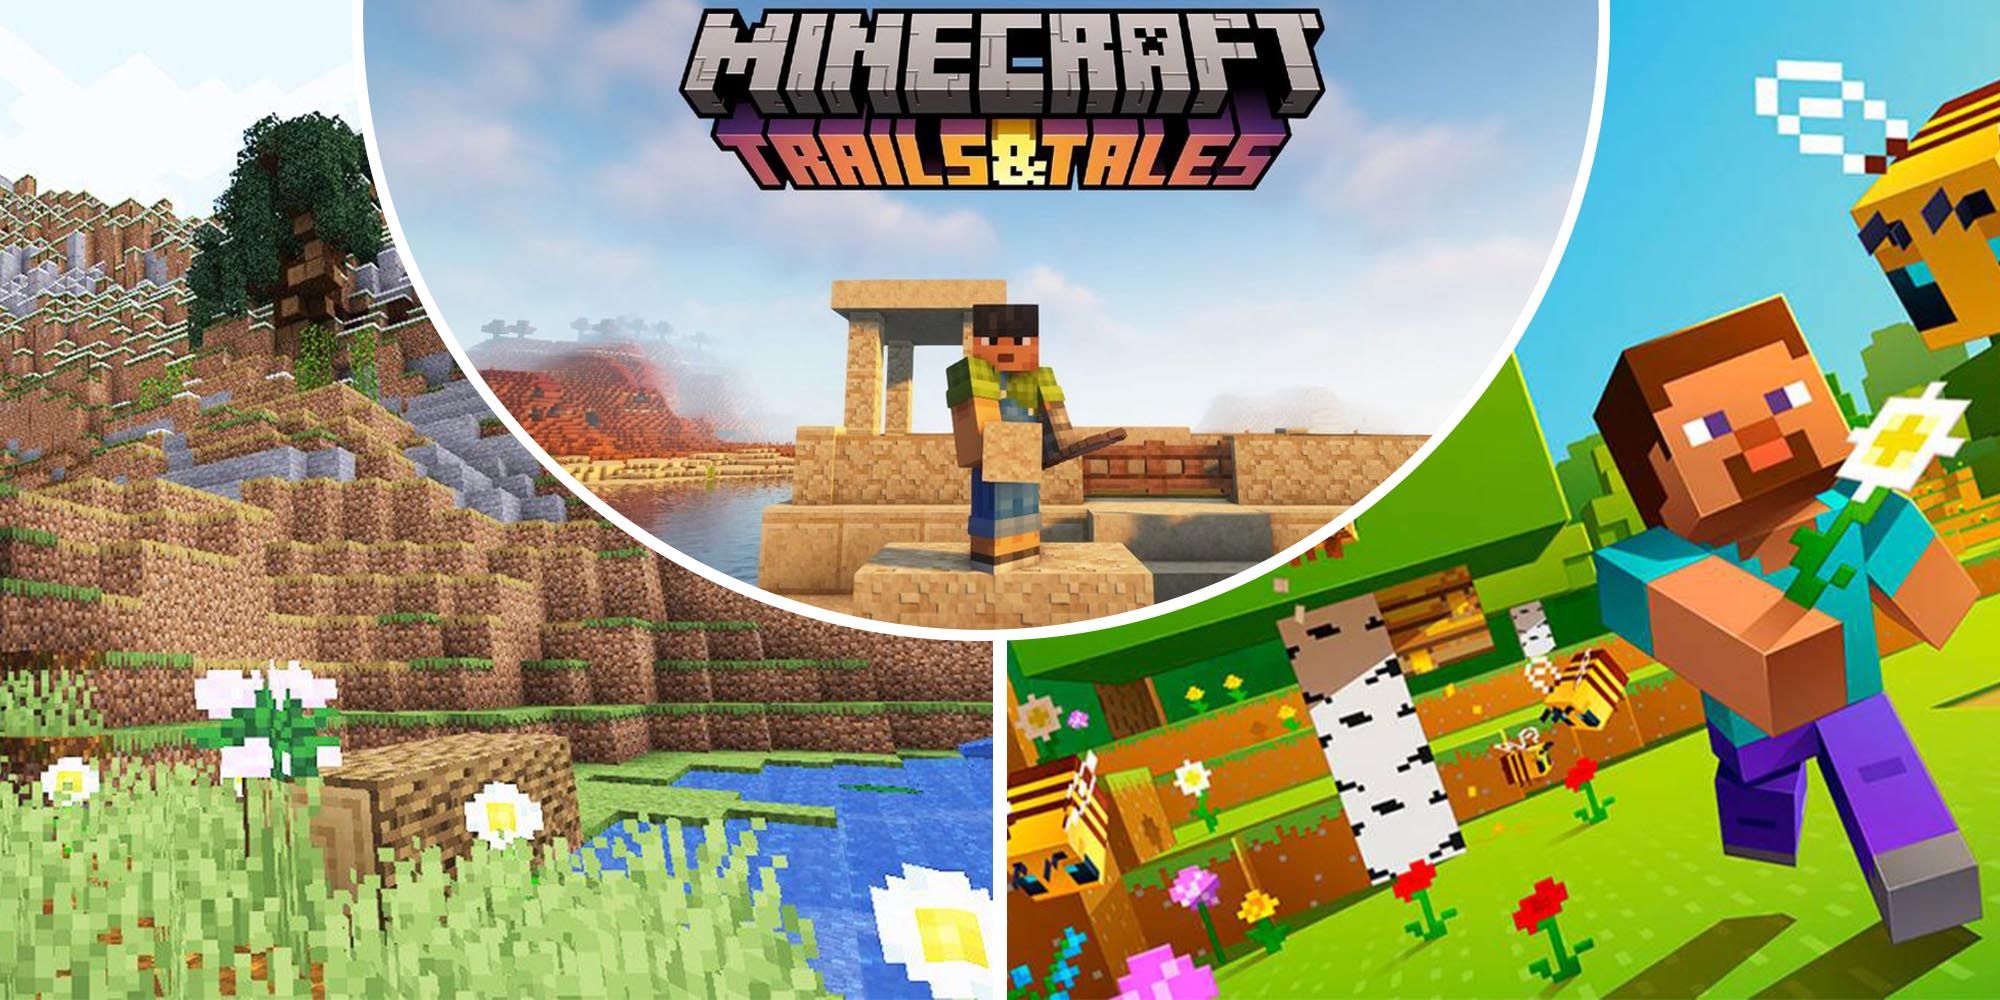 Minecraft Chromebook Trails and Tales update